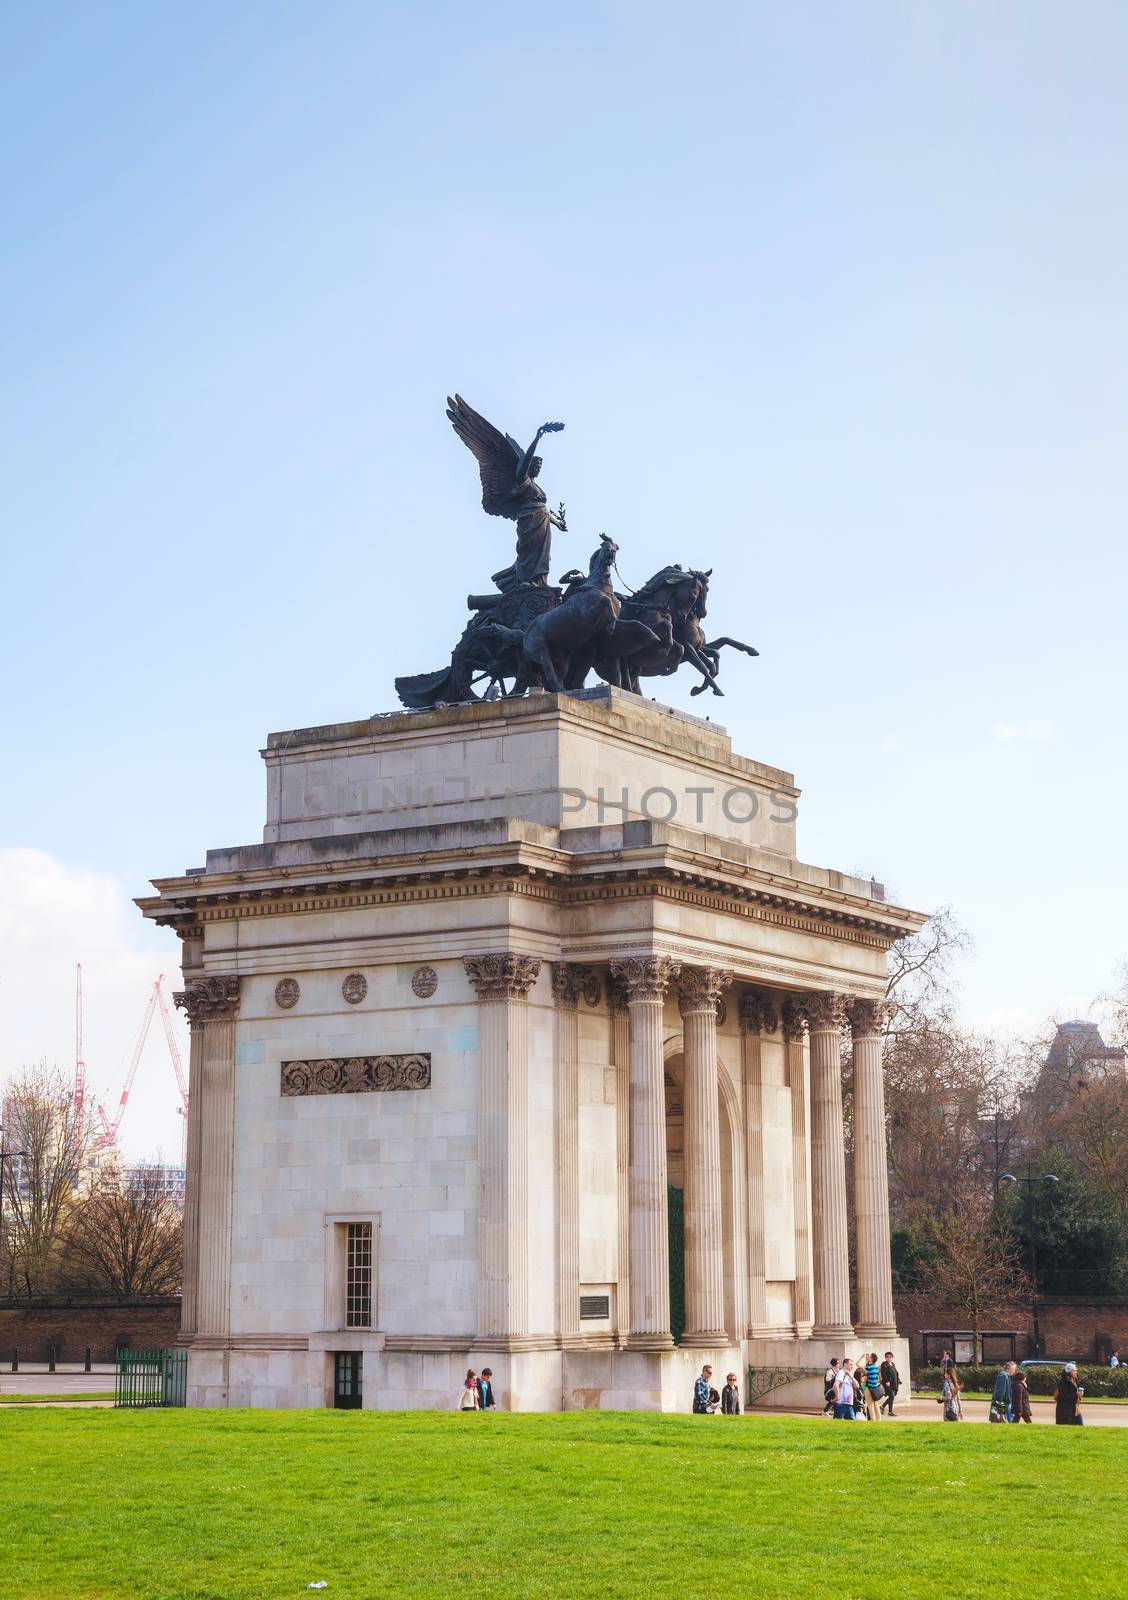 Wellington Arch monument in London, UK by AndreyKr